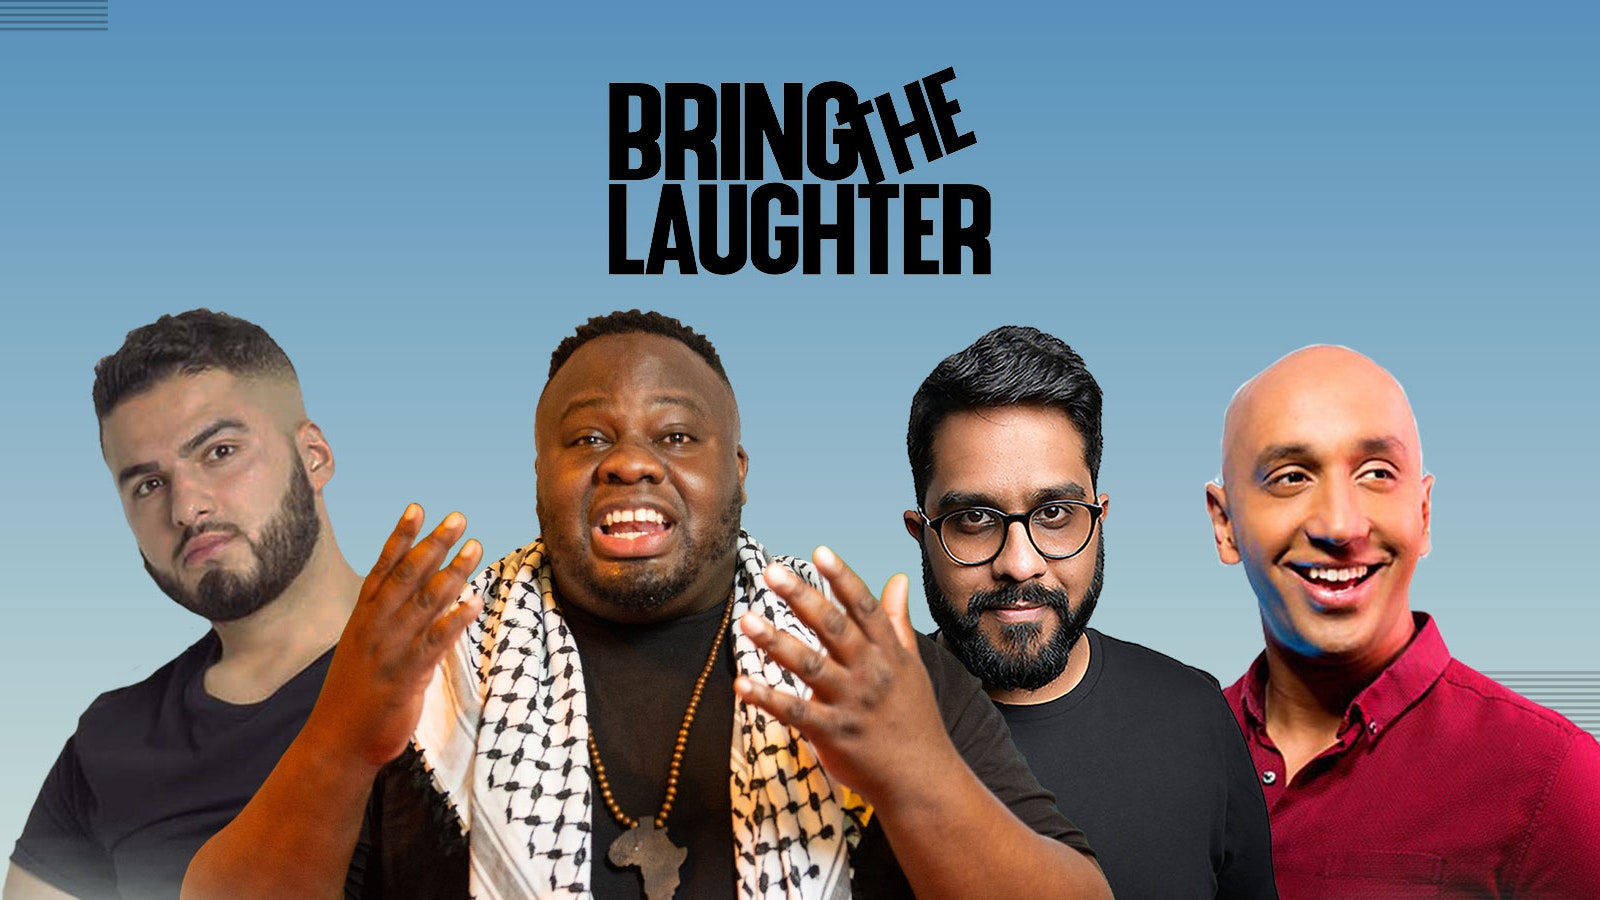 Bring The Laughter – Streatham